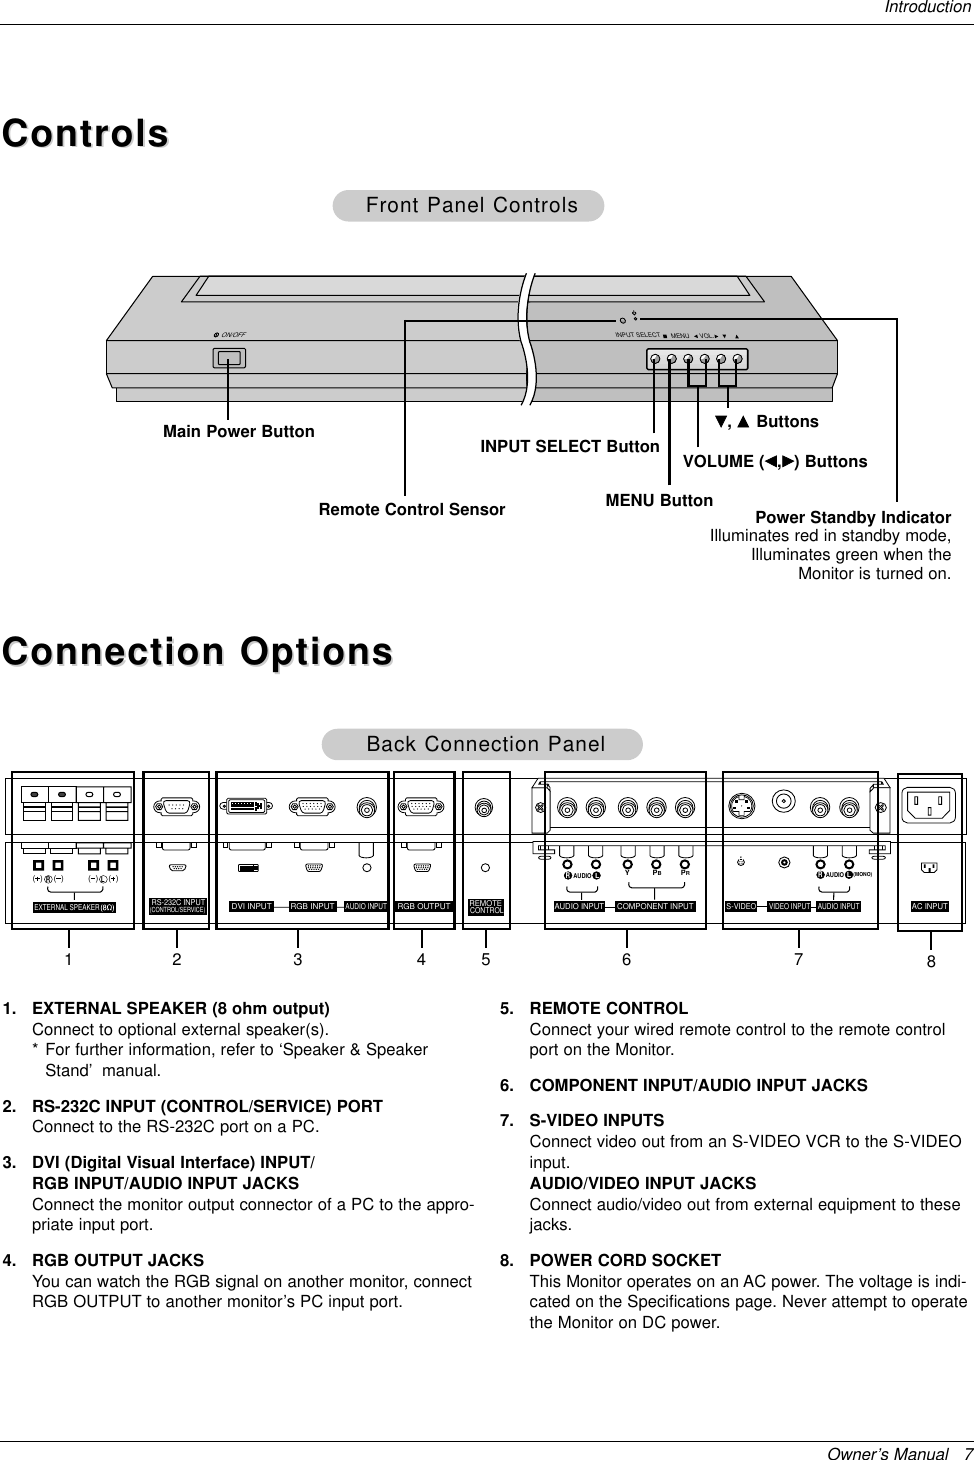 Owner’s Manual   7IntroductionControlsControlsConnection OptionsConnection OptionsR(  )(  )(  )(  )LRS-232C INPUT(CONTROL/SERVICE)EXTERNAL SPEAKERYPBPR(MONO)RAUDIOLRAUDIOLS-VIDEOAC INPUTAUDIO INPUTVIDEO INPUTAUDIO INPUTAUDIO INPUTREMOTECONTROLCOMPONENT INPUTDVI INPUT RGB INPUT RGB OUTPUT11. EXTERNAL SPEAKER (8 ohm output)Connect to optional external speaker(s).* For further information, refer to ‘Speaker &amp; SpeakerStand’manual.2. RS-232C INPUT (CONTROL/SERVICE) PORTConnect to the RS-232C port on a PC.3. DVI (Digital Visual Interface) INPUT/RGB INPUT/AUDIO INPUT JACKSConnect the monitor output connector of a PC to the appro-priate input port.4. RGB OUTPUT JACKSYou can watch the RGB signal on another monitor, connectRGB OUTPUT to another monitor’s PC input port.5. REMOTE CONTROLConnect your wired remote control to the remote controlport on the Monitor.6. COMPONENT INPUT/AUDIO INPUT JACKS7. S-VIDEO INPUTSConnect video out from an S-VIDEO VCR to the S-VIDEOinput.AUDIO/VIDEO INPUT JACKSConnect audio/video out from external equipment to thesejacks.8. POWER CORD SOCKETThis Monitor operates on an AC power. The voltage is indi-cated on the Specifications page. Never attempt to operatethe Monitor on DC power.Back Connection PanelBack Connection PanelVOL.MENUINPUT SELECTON/OFFMain Power Button INPUT SELECT Button VOLUME (F,G) ButtonsPower Standby IndicatorIlluminates red in standby mode,Illuminates green when theMonitor is turned on.Remote Control Sensor MENU ButtonE, D ButtonsFront Panel ControlsFront Panel Controls2 4 53 7 86